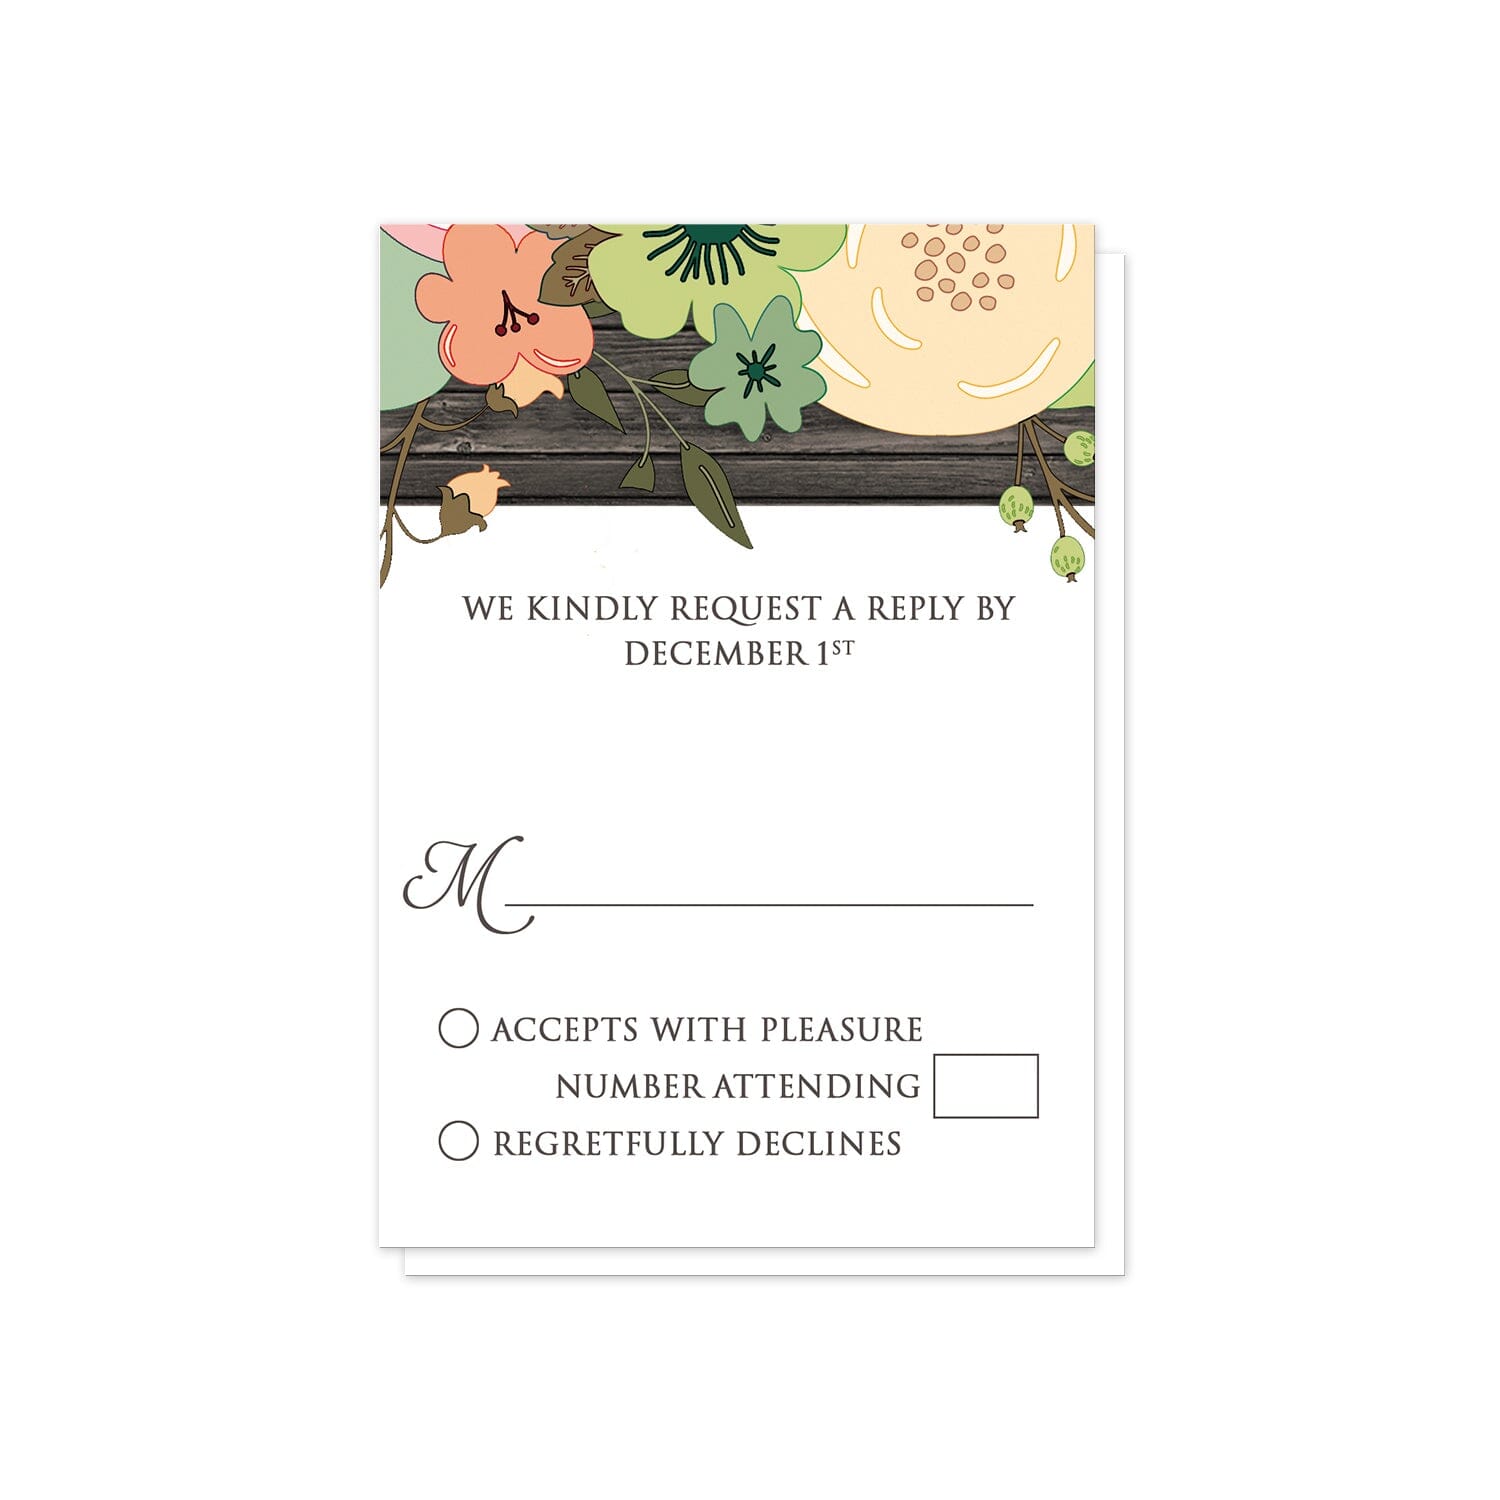 Rustic Orange Teal Floral RSVP Cards Invitations at Artistically Invited.